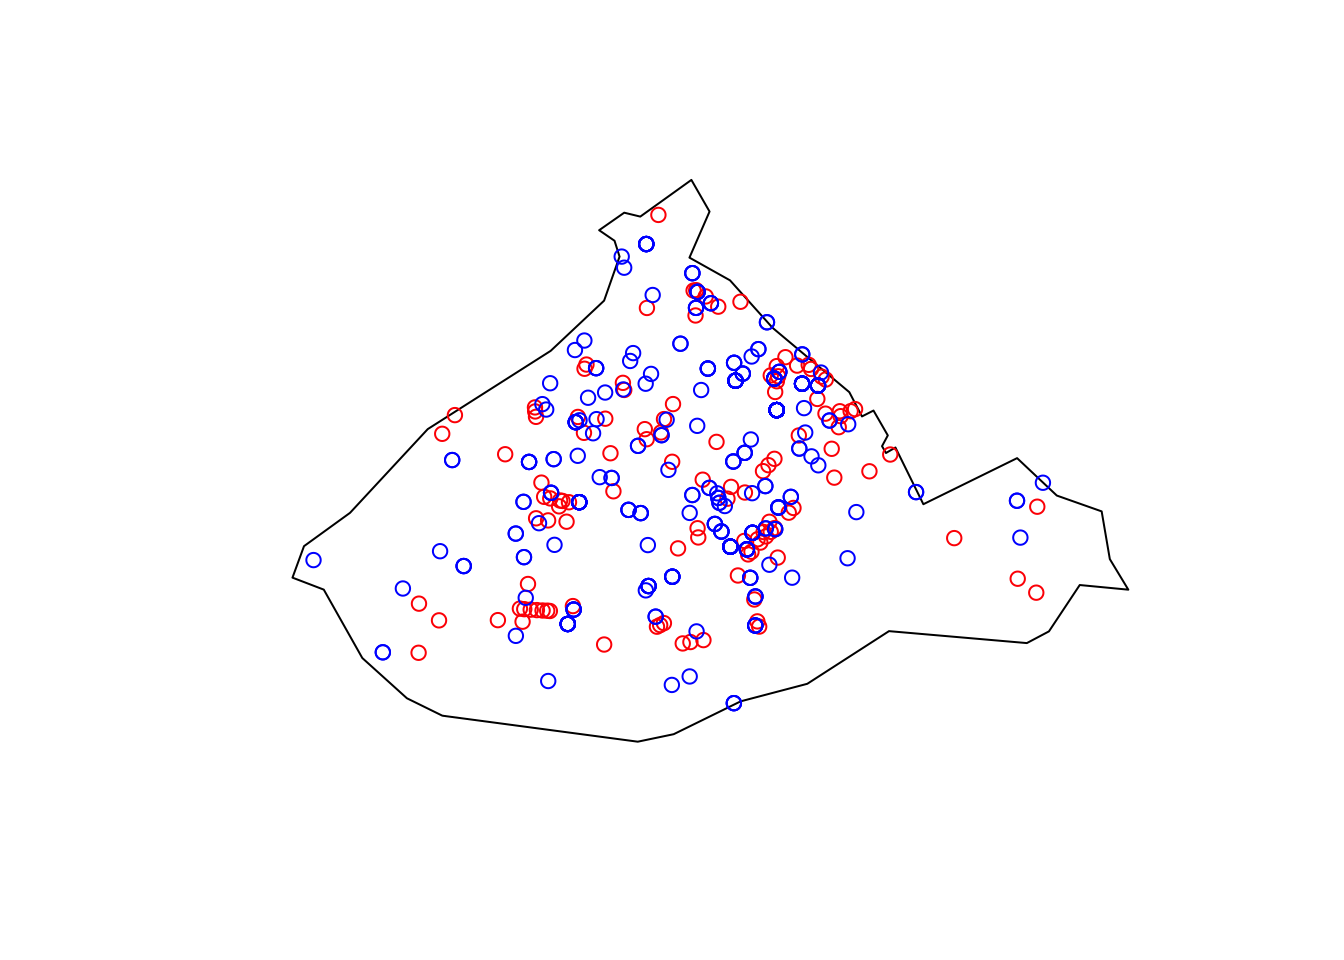 An outline of the City Centre ward, with numerous red and blue circles spread across its interior. The far east and west are more sparse with both types of circles compared to the centre and northeast.